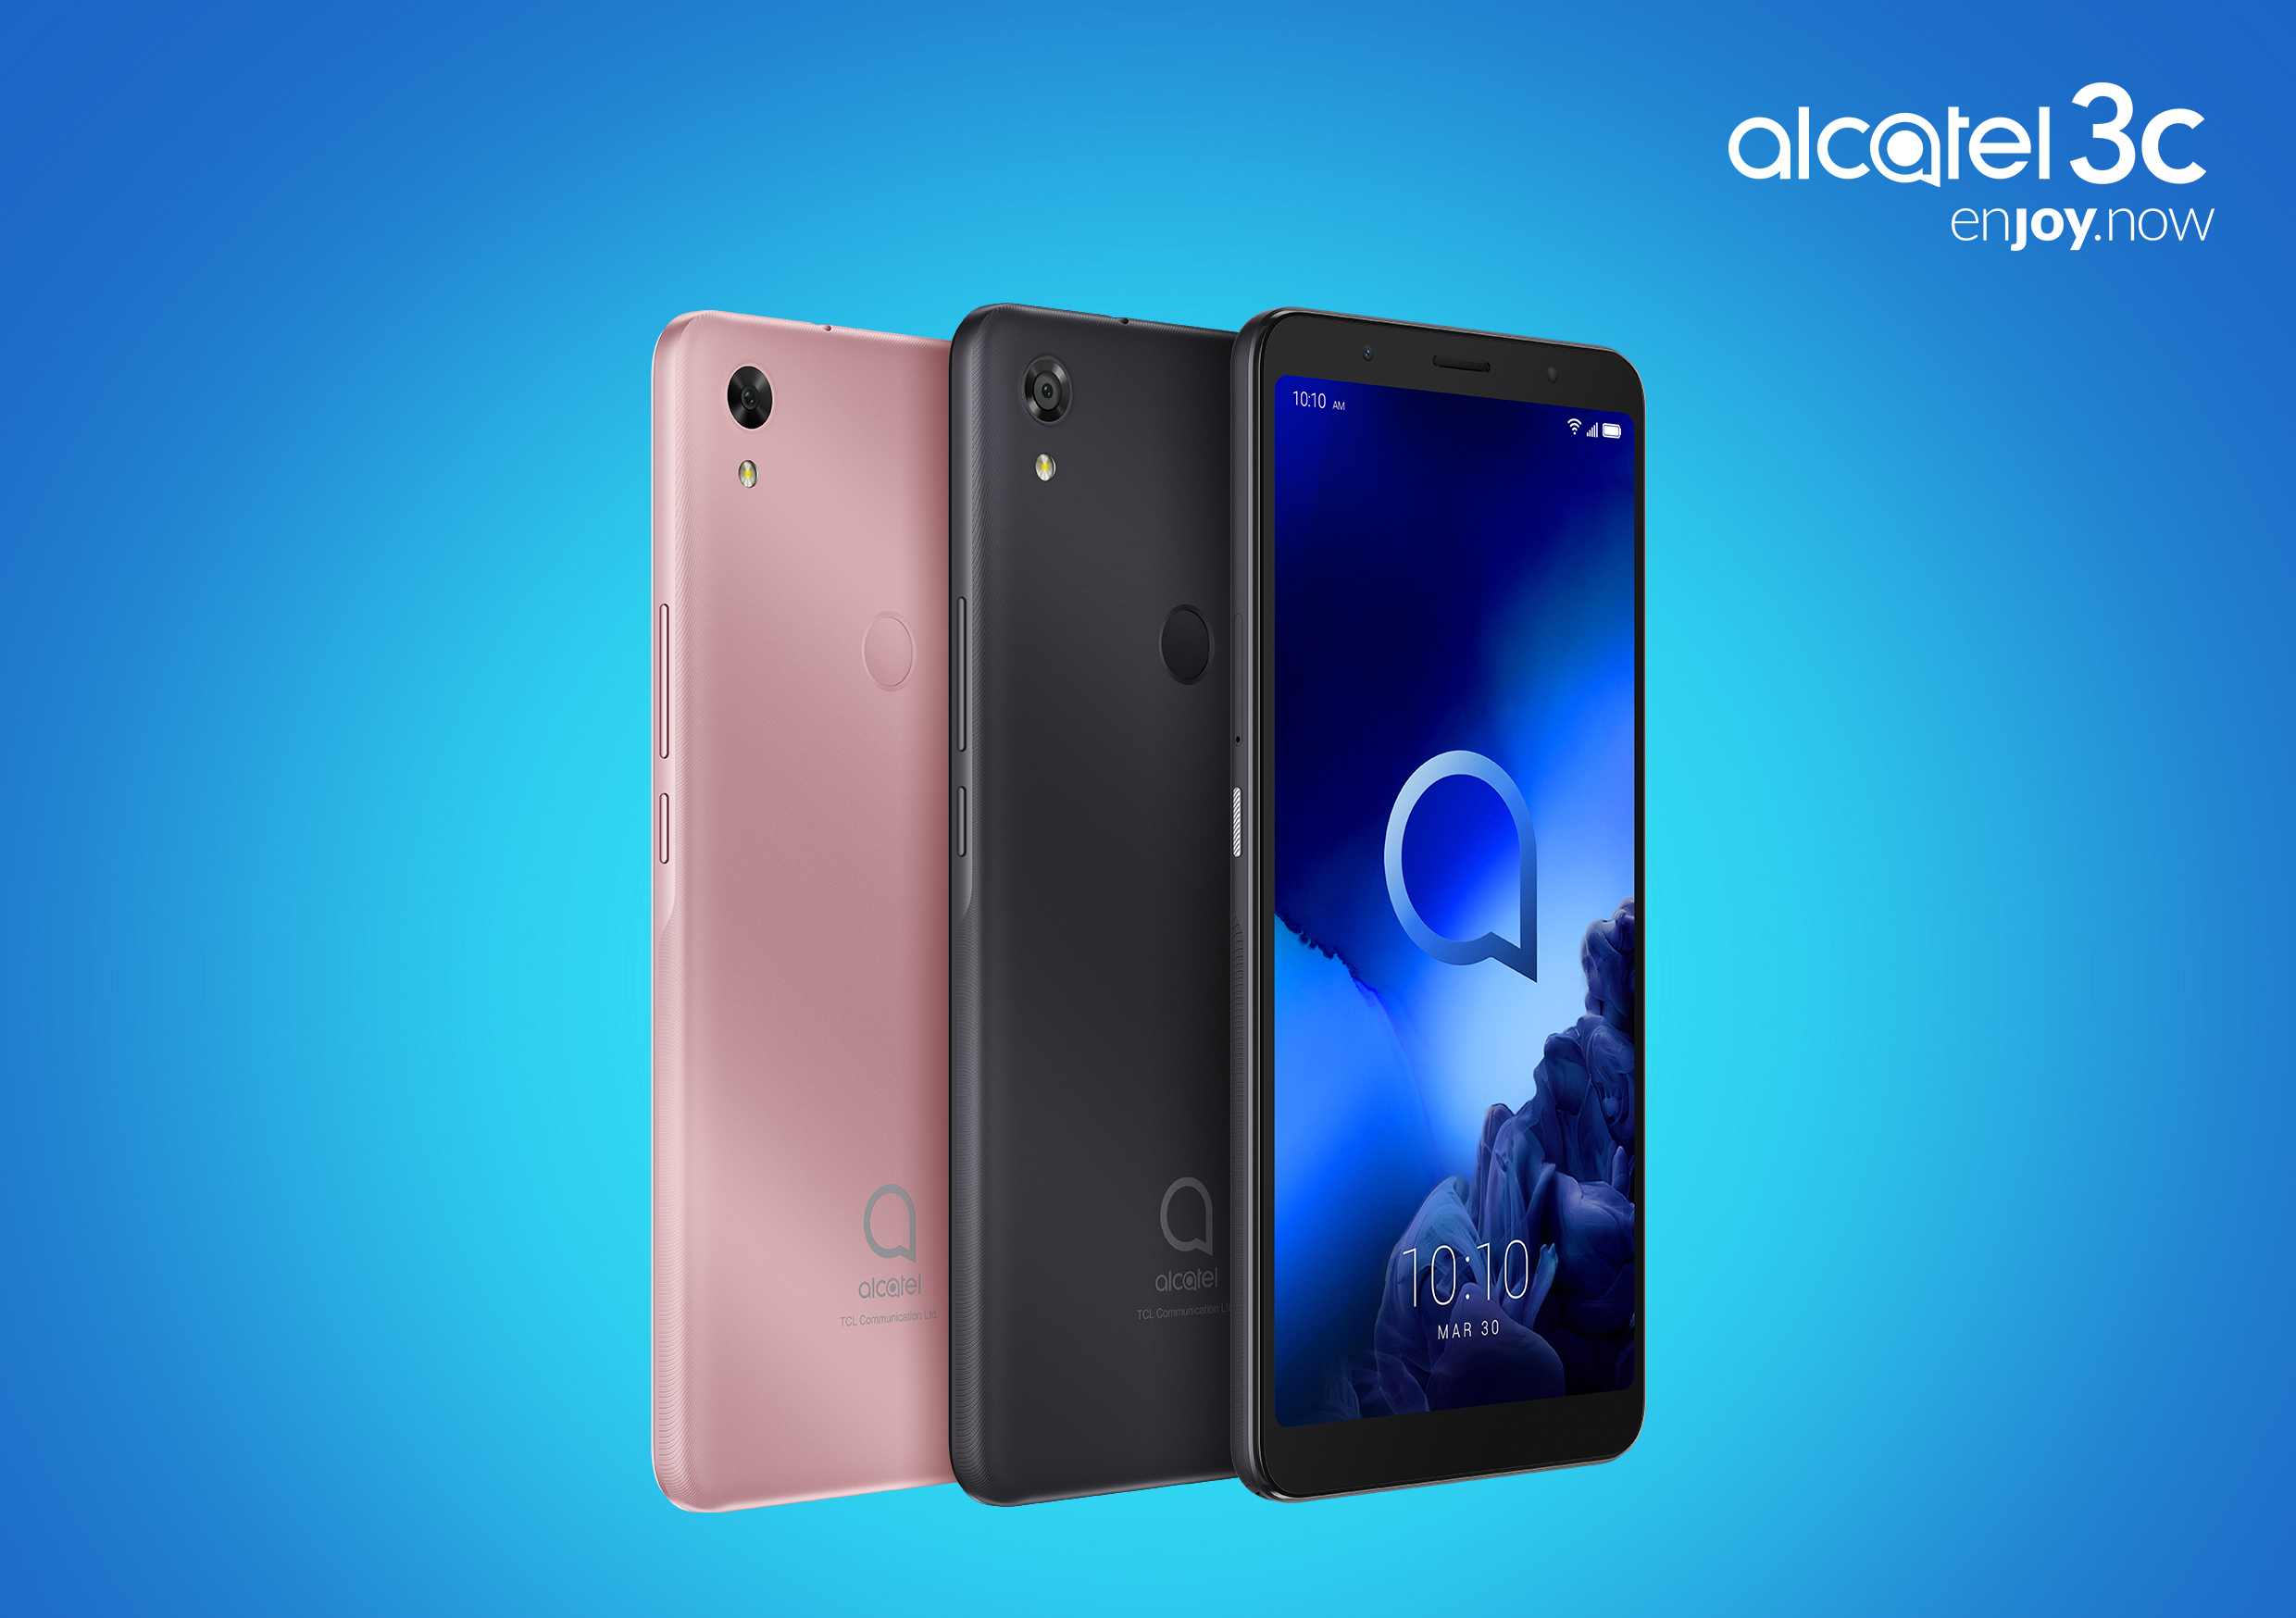 TCL Communication introduces the Alcatel 3C with the dedicated Google Assistant Button and cinematic viewing experience